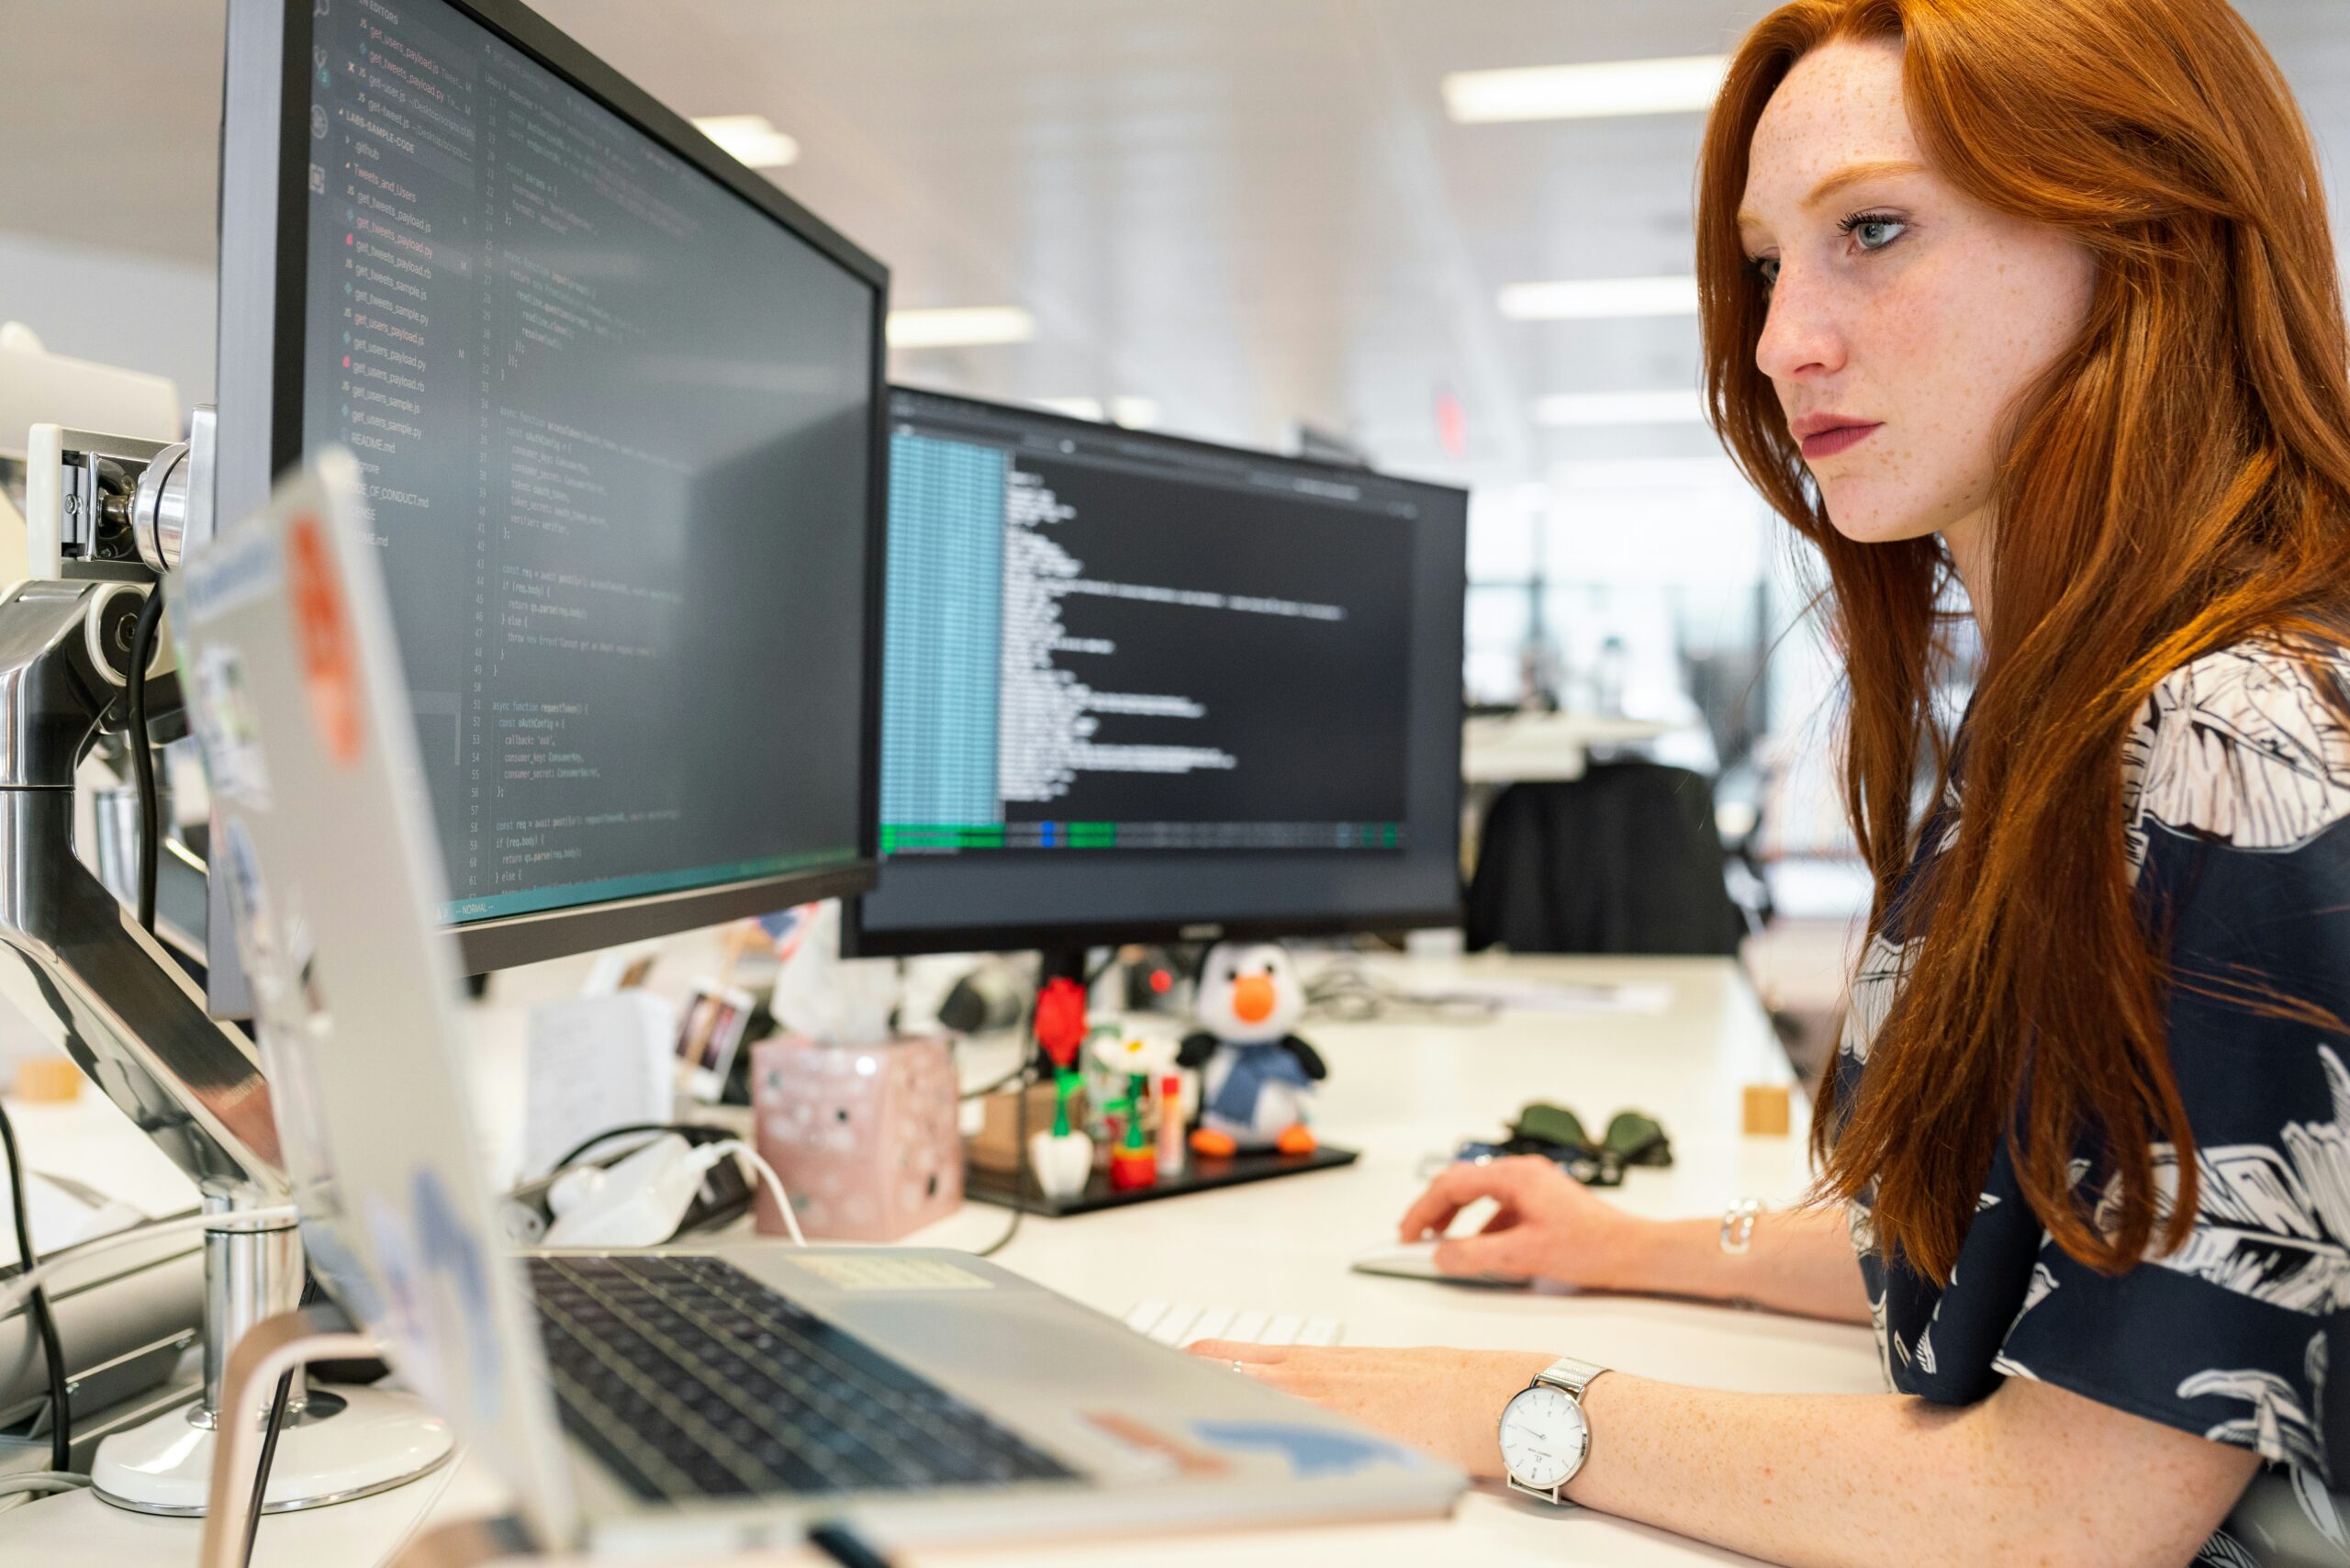 Red-haired woman works at a desk with multiple computer screens displaying code in a modern office specializing in fully managed IT services.